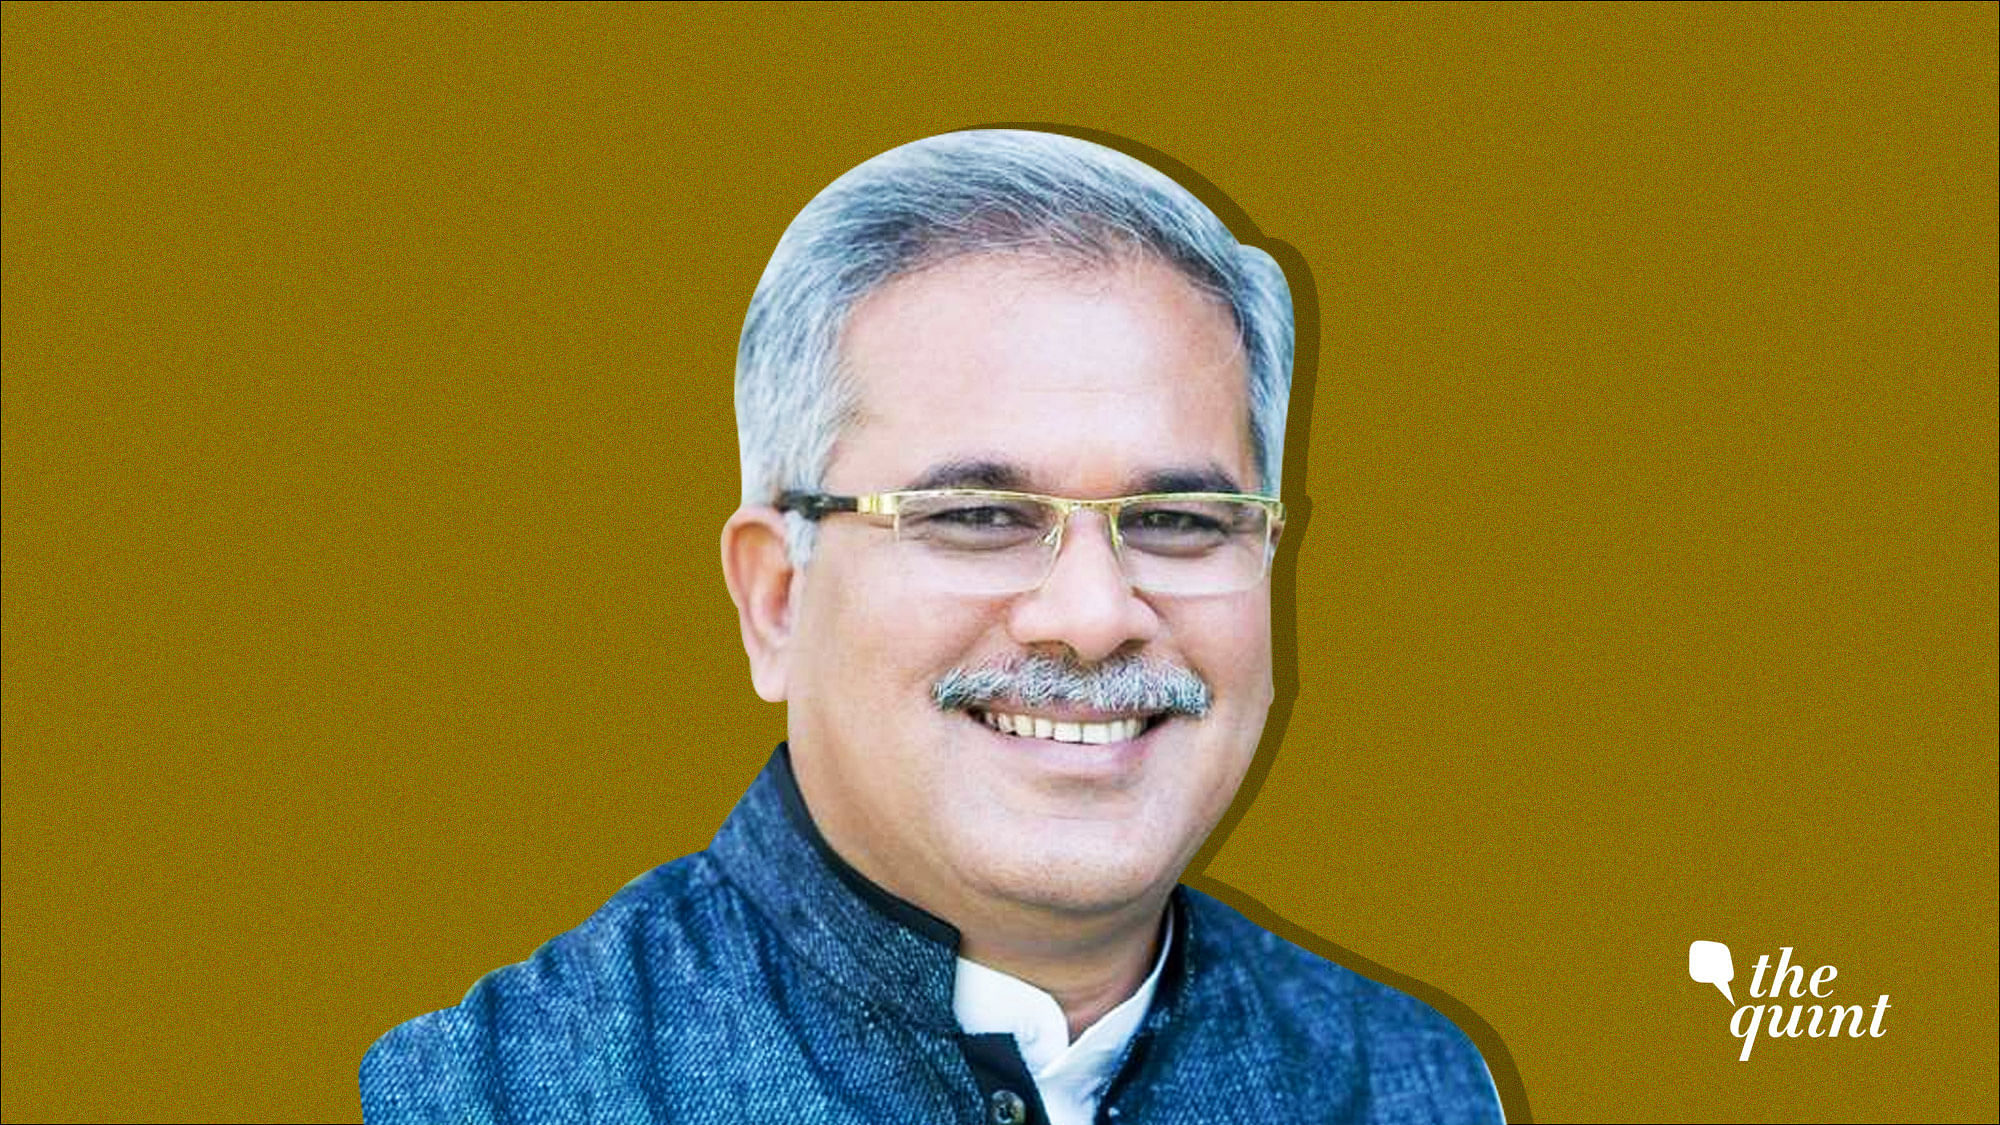 Bhupesh Baghel has been the President of the Chhattisgarh Congress since 2014. He is believed to have played a key role in the Congress’ victory in the state.